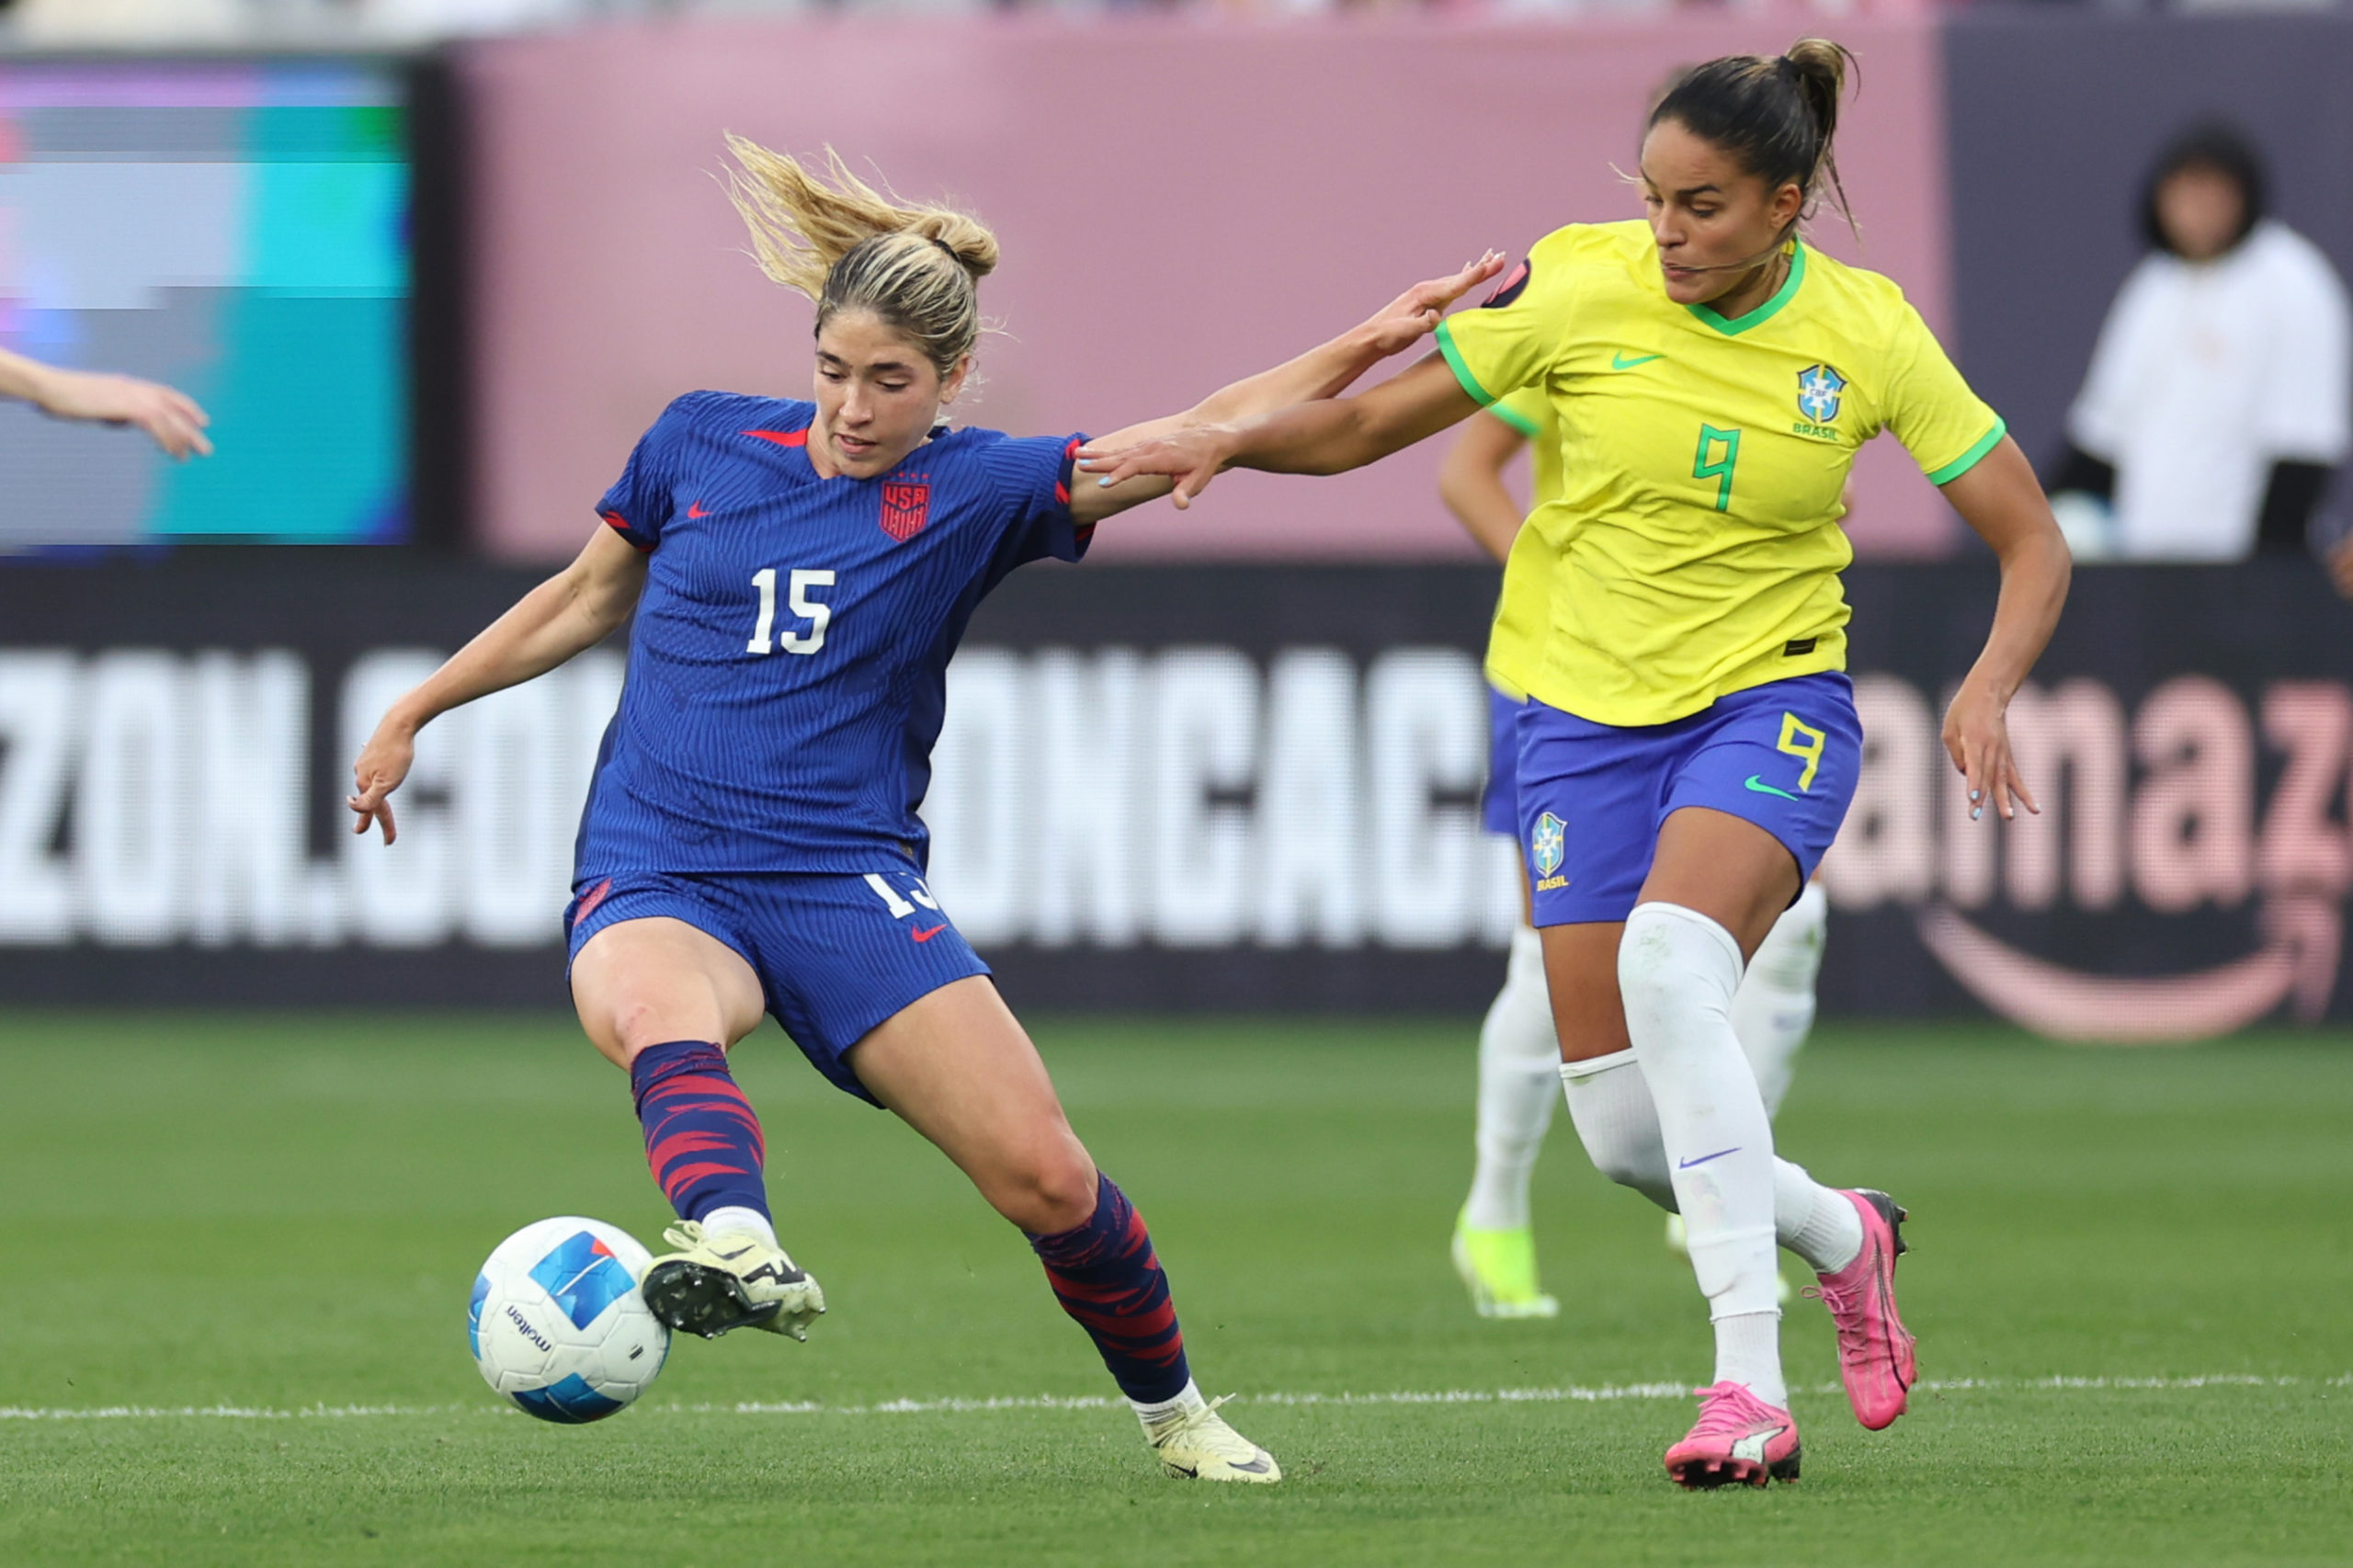 SAN DIEGO, CALIFORNIA - MARCH 10: Korbin Albert #15 of the United States is challenged by Gabi Nunes #9 of Brazil during the second half of the 2024 Concacaf W Gold Cup Final at Snapdragon Stadium on March 10, 2024 in San Diego, California. Sean M. Haffey/Getty Images